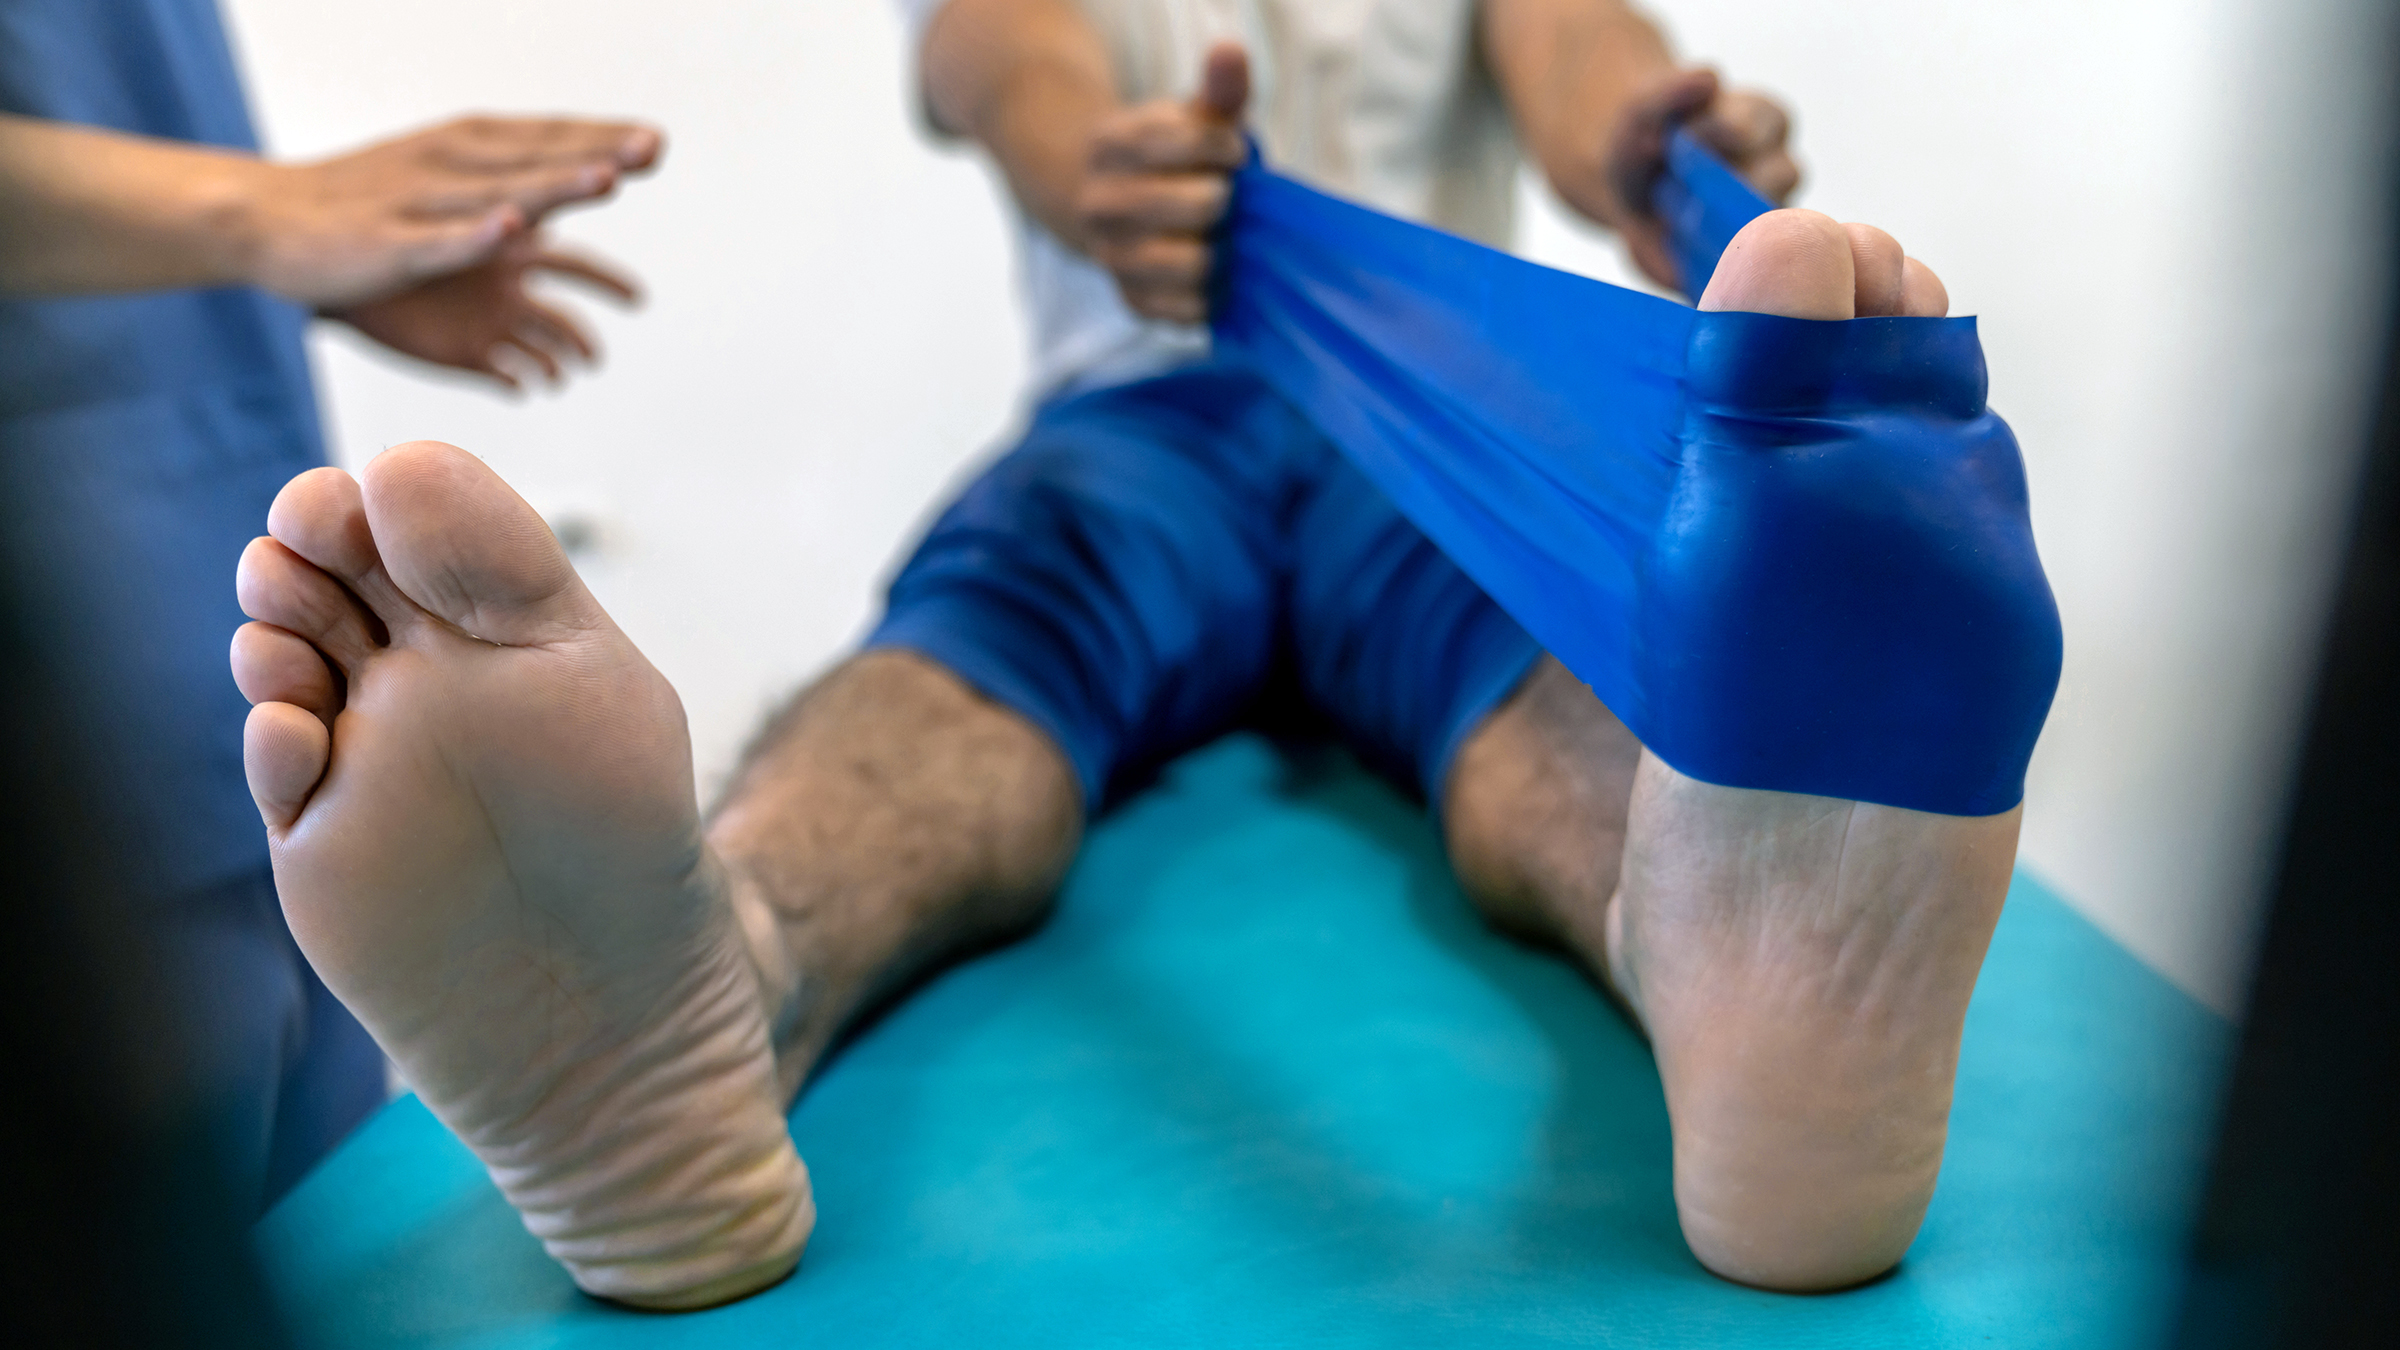 6 Stretches To Relieve Your Morning Foot Pain